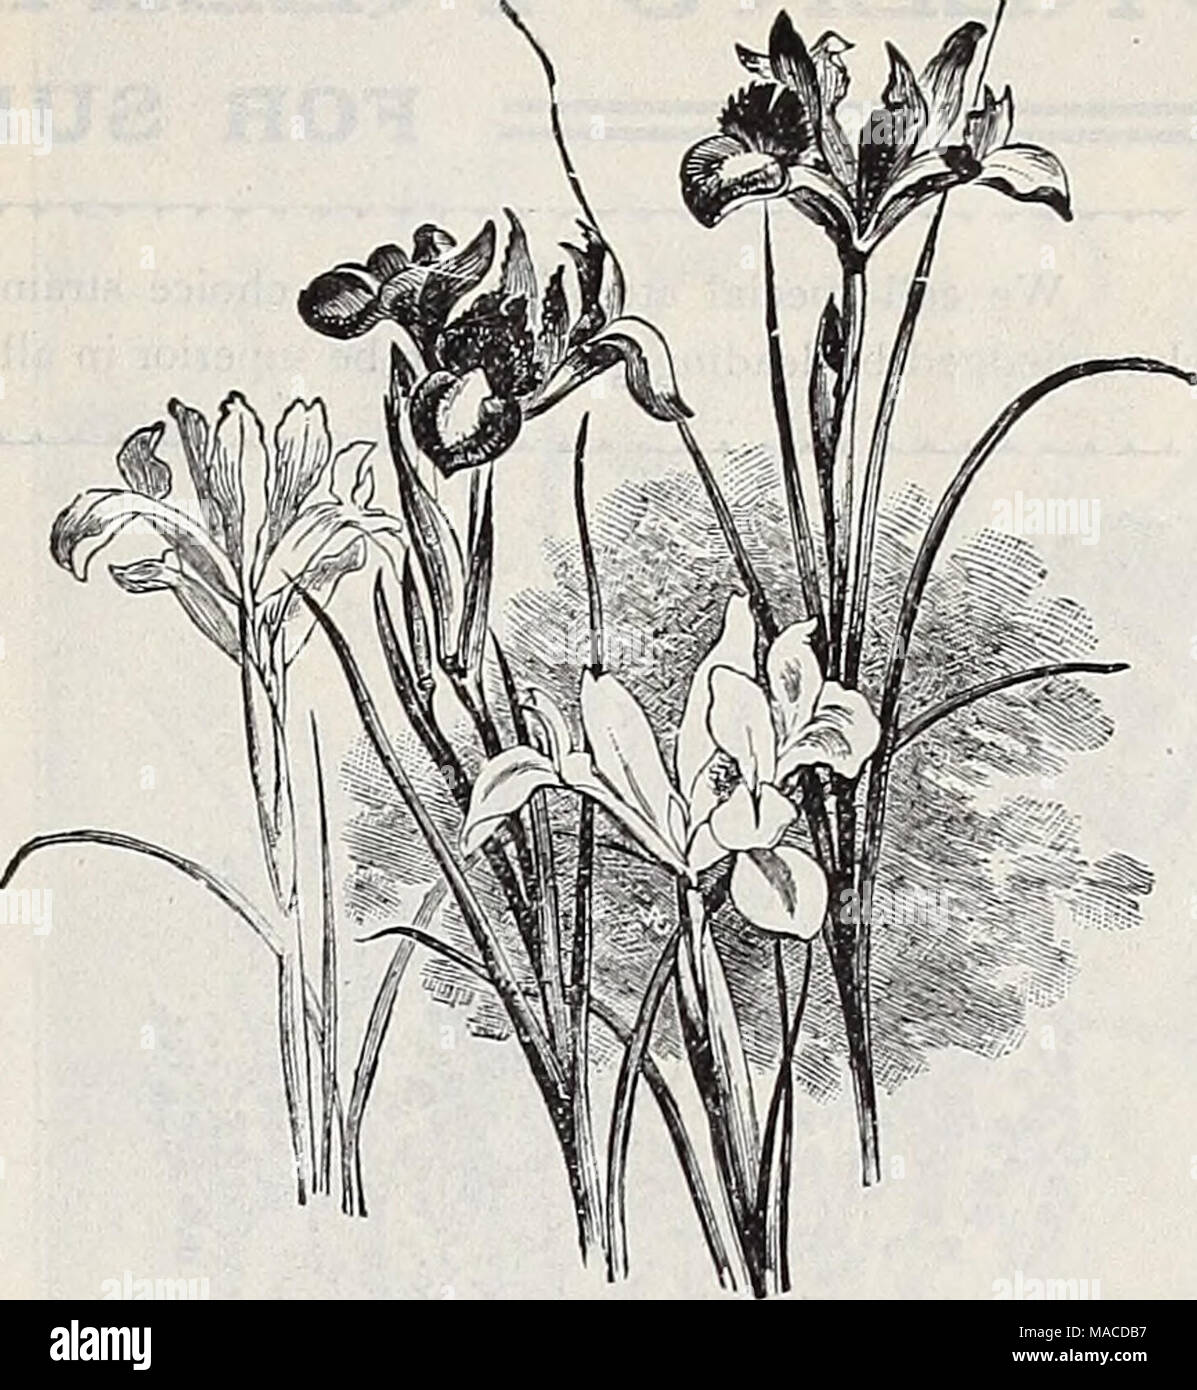 . Dreer's wholesale price list : seeds for florists plants for florists bulbs for florists vegetable seeds, fungicides, fertilizers, insecticides implements, sundries, etc . SPANISH IRIS Oxalis. Bermuda Buttercup. Extra strong . Bowiei. Rosy crimson, fine .... Cernuuafl.pl. Double yellow. . Grand Duchess. Pink White . . &quot; &quot; Lavender Versicolor. Red, violet and white . Mixed. All colors Per 100 Per 1000 $085 $7 50 I 00 q 00 I 50 12 GO 85 7 00 85 7 00- 85 7 00 60 5 00 50 3 50 Puschkinia. Libannotica (Striped Squill) 9 CO' Ranunculus. Persian. Double, all colors mixed Turban. Double, al Stock Photo